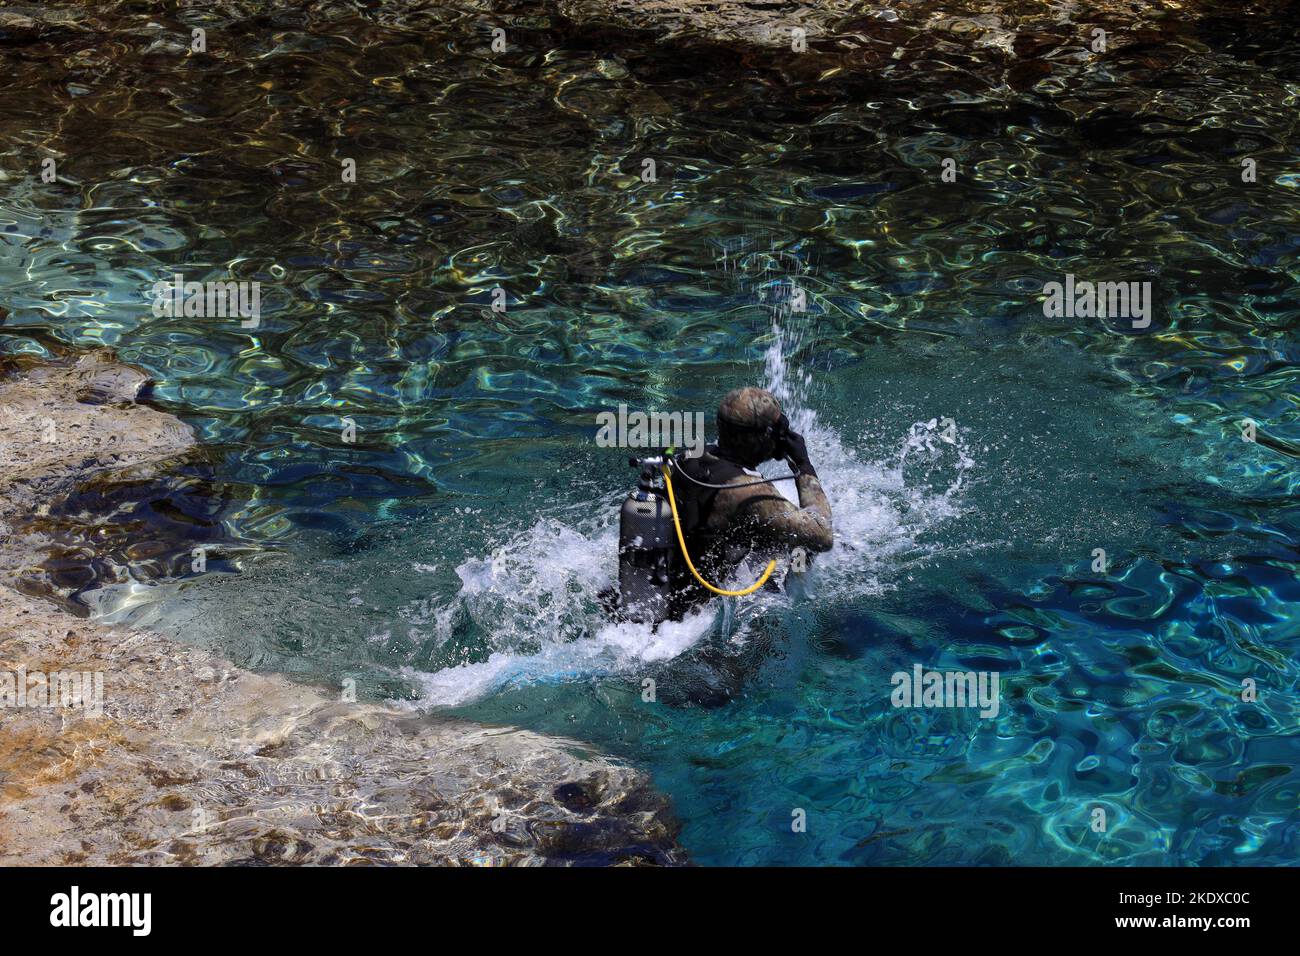 May 29, 2022, Larnaca, Cyprus: A scuba diver jumps into the blue lagoon of the Mediterranean Sea at Cape Greco National Forest Park at the southern end of Famagusta Bay and forms part of Ayia Napa Municipality. The Republic of Cyprus stands at a historic and cultural crossroads between Europe and Asia. Its chief cities-the capital of Nicosia, Limassol, Famagusta, and Paphos have absorbed the influences of generations of conquerors, pilgrims, and travelers and have an air that is both cosmopolitan and provincial. Today Cyprus is a popular tourist destination for visitors from Europe, favored by Stock Photo